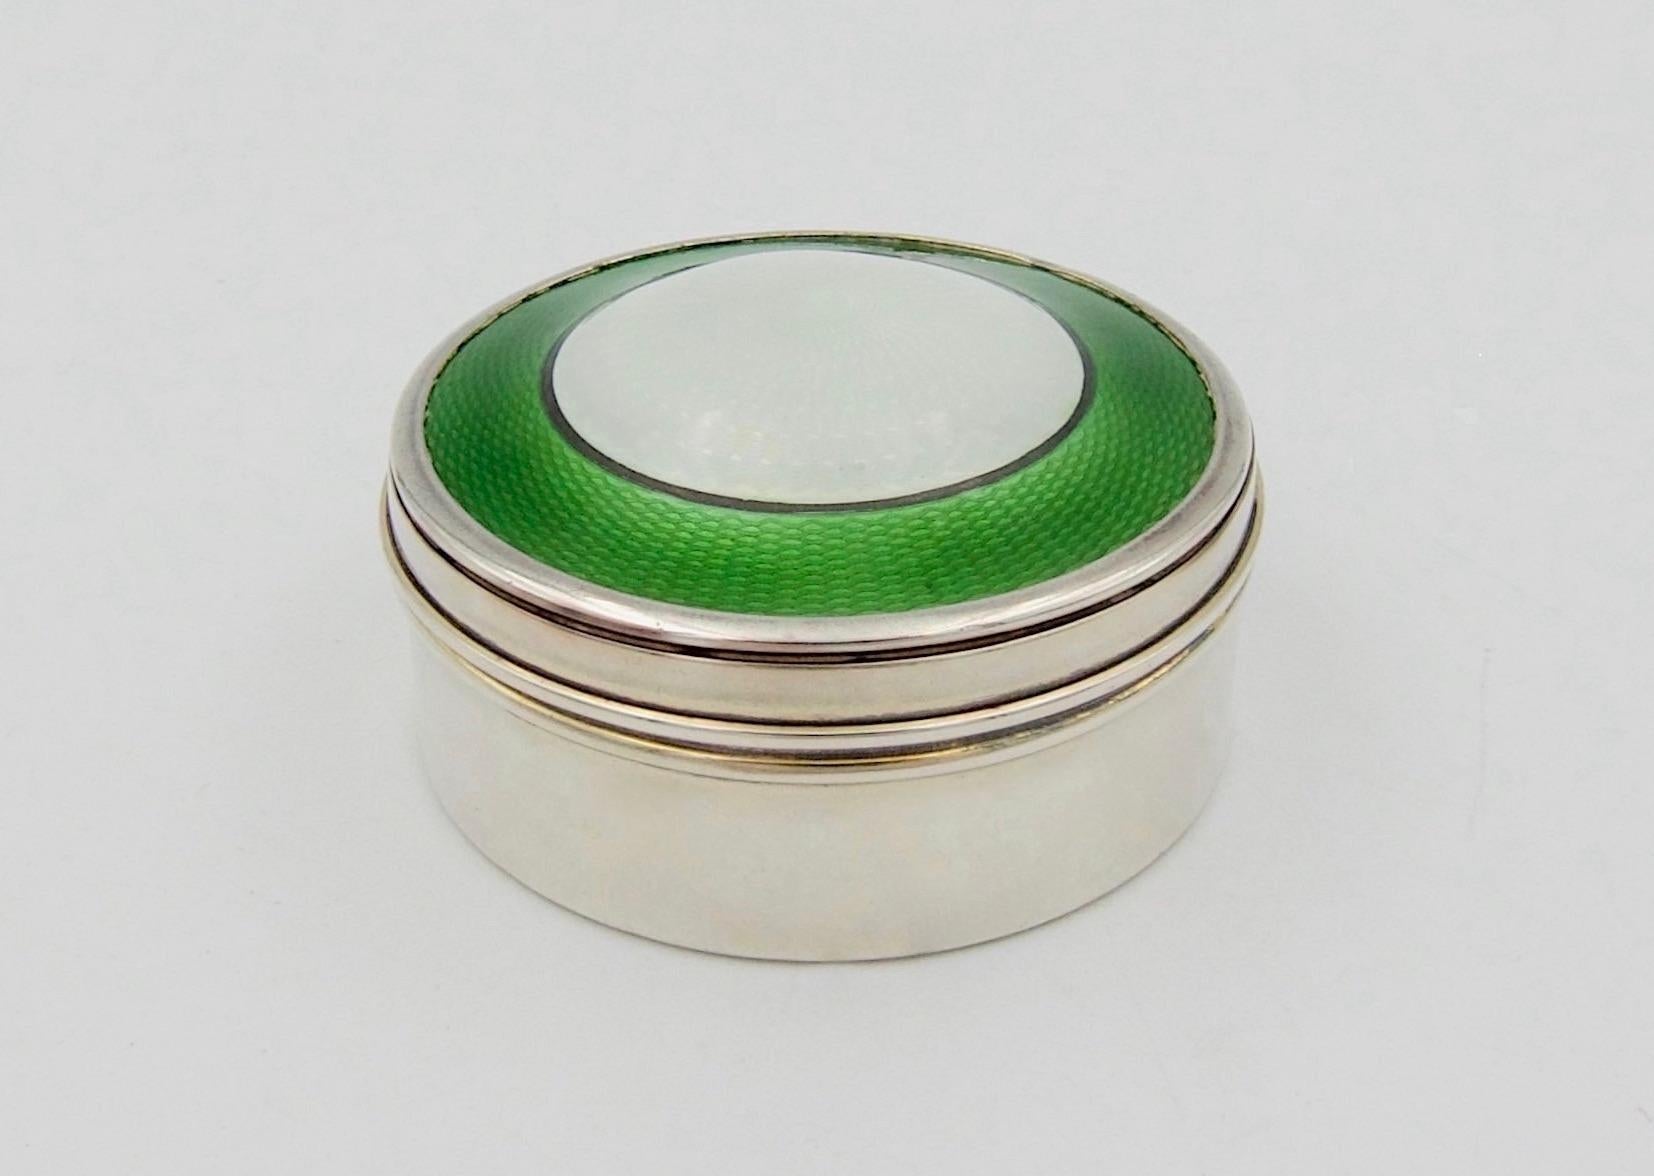 Antique Sterling Silver Box with Guilloche Enamel Gilt Interior and Domed Lid 4